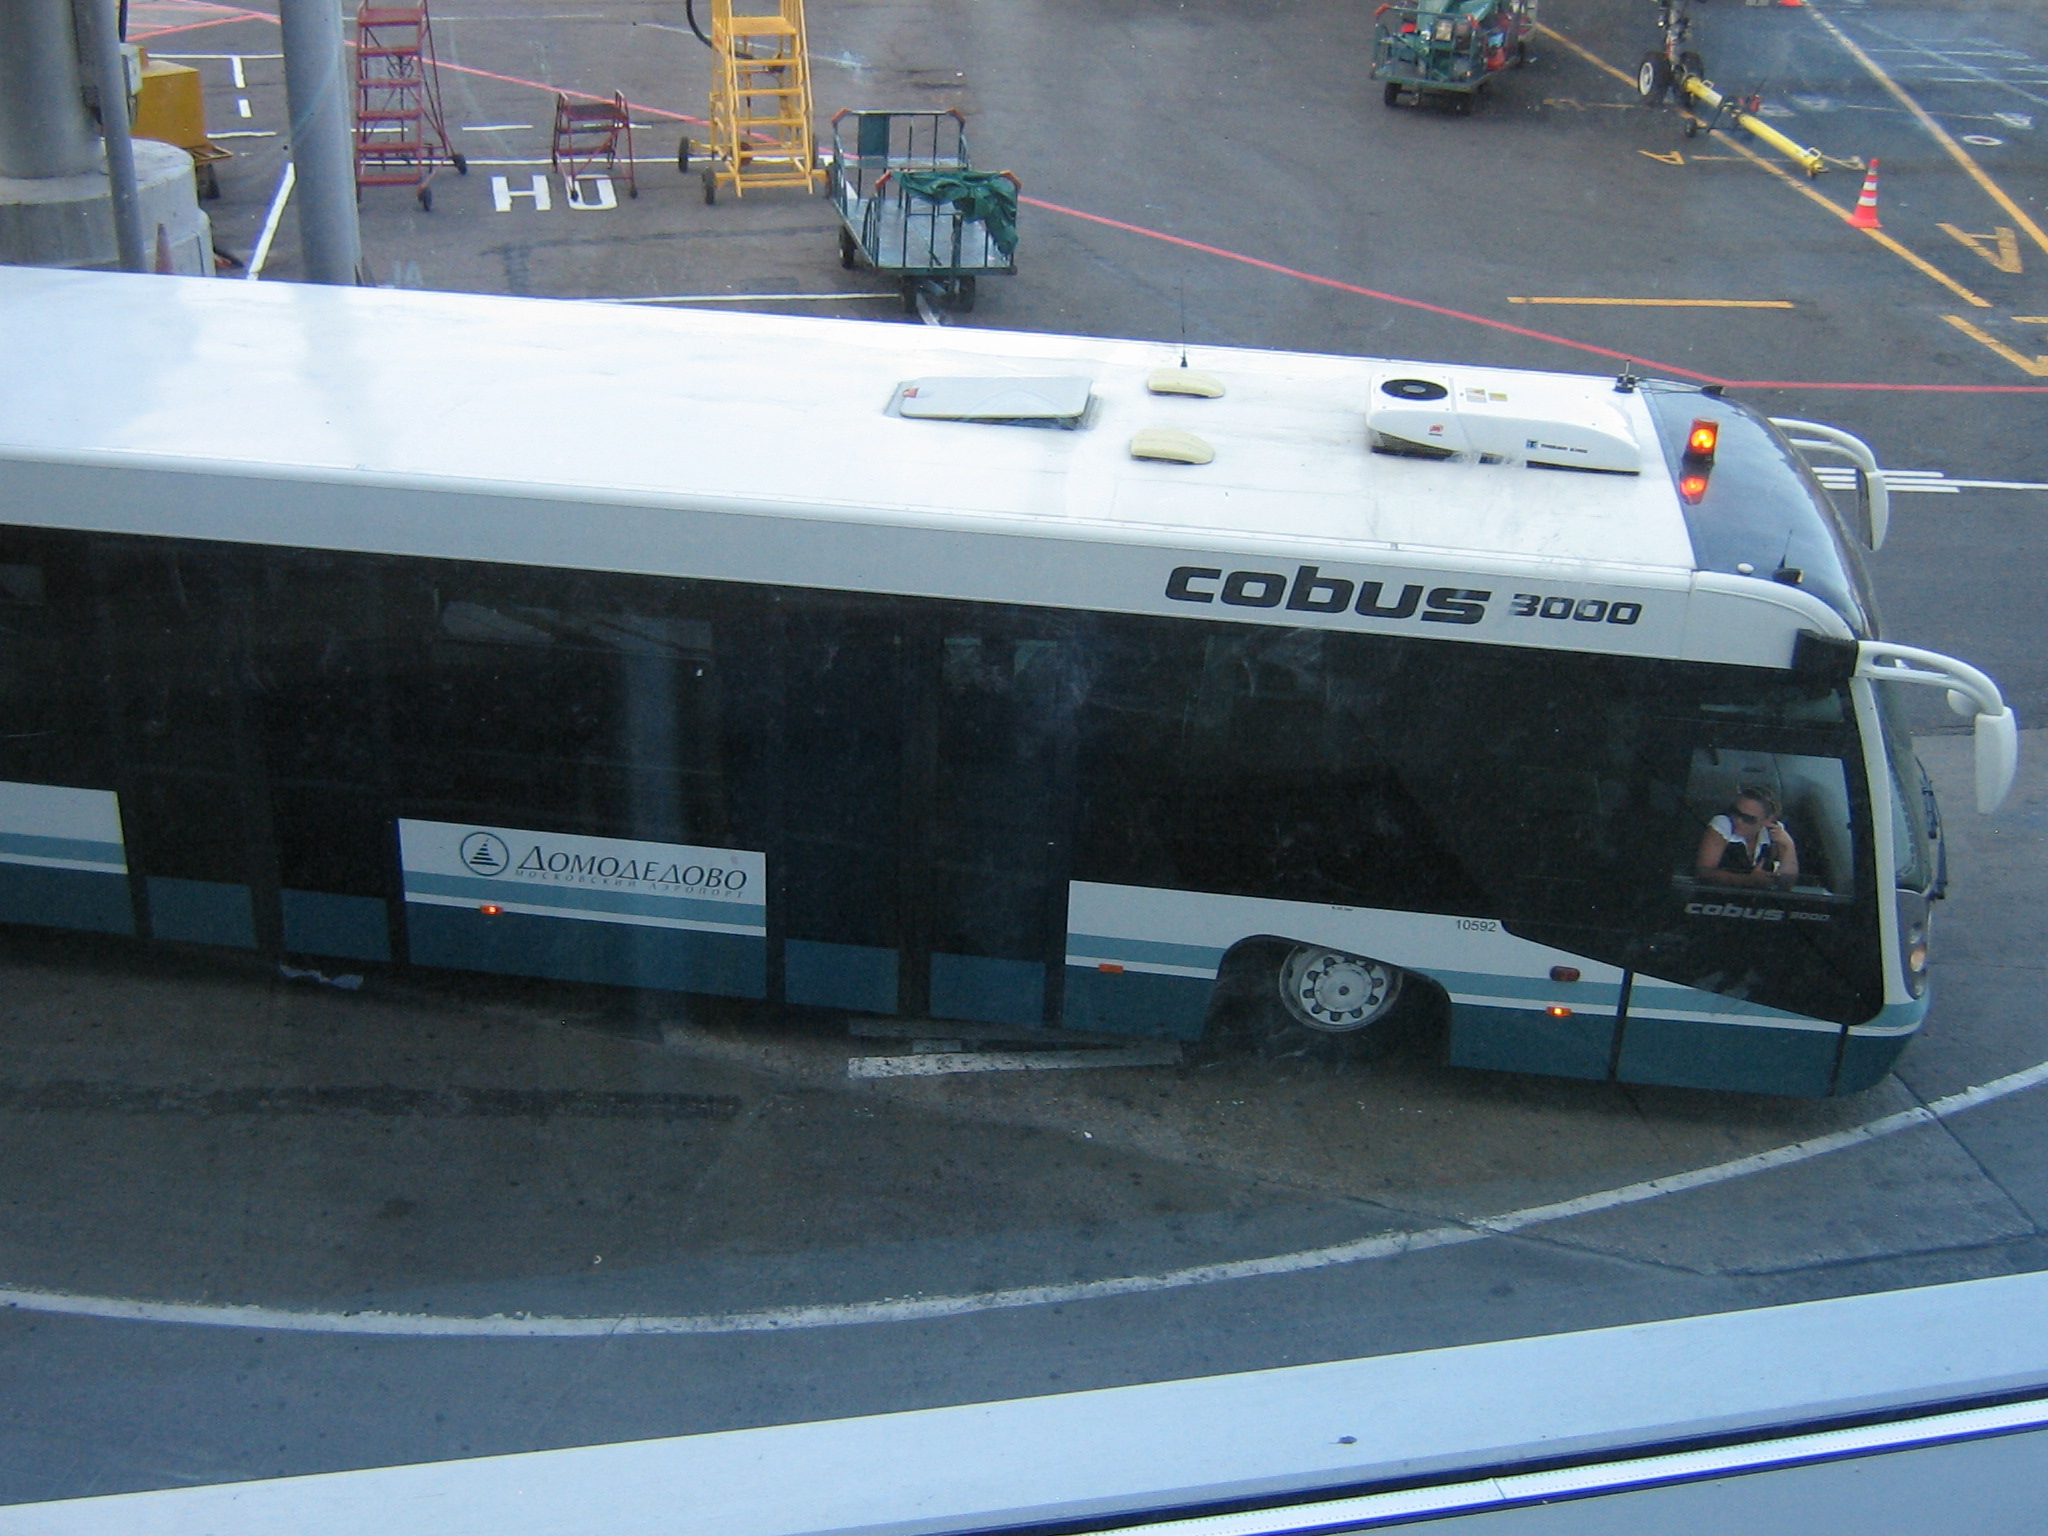 File:Airfield Shuttle Contrac Cobus 3000 DME.JPG - Wikimedia Commons